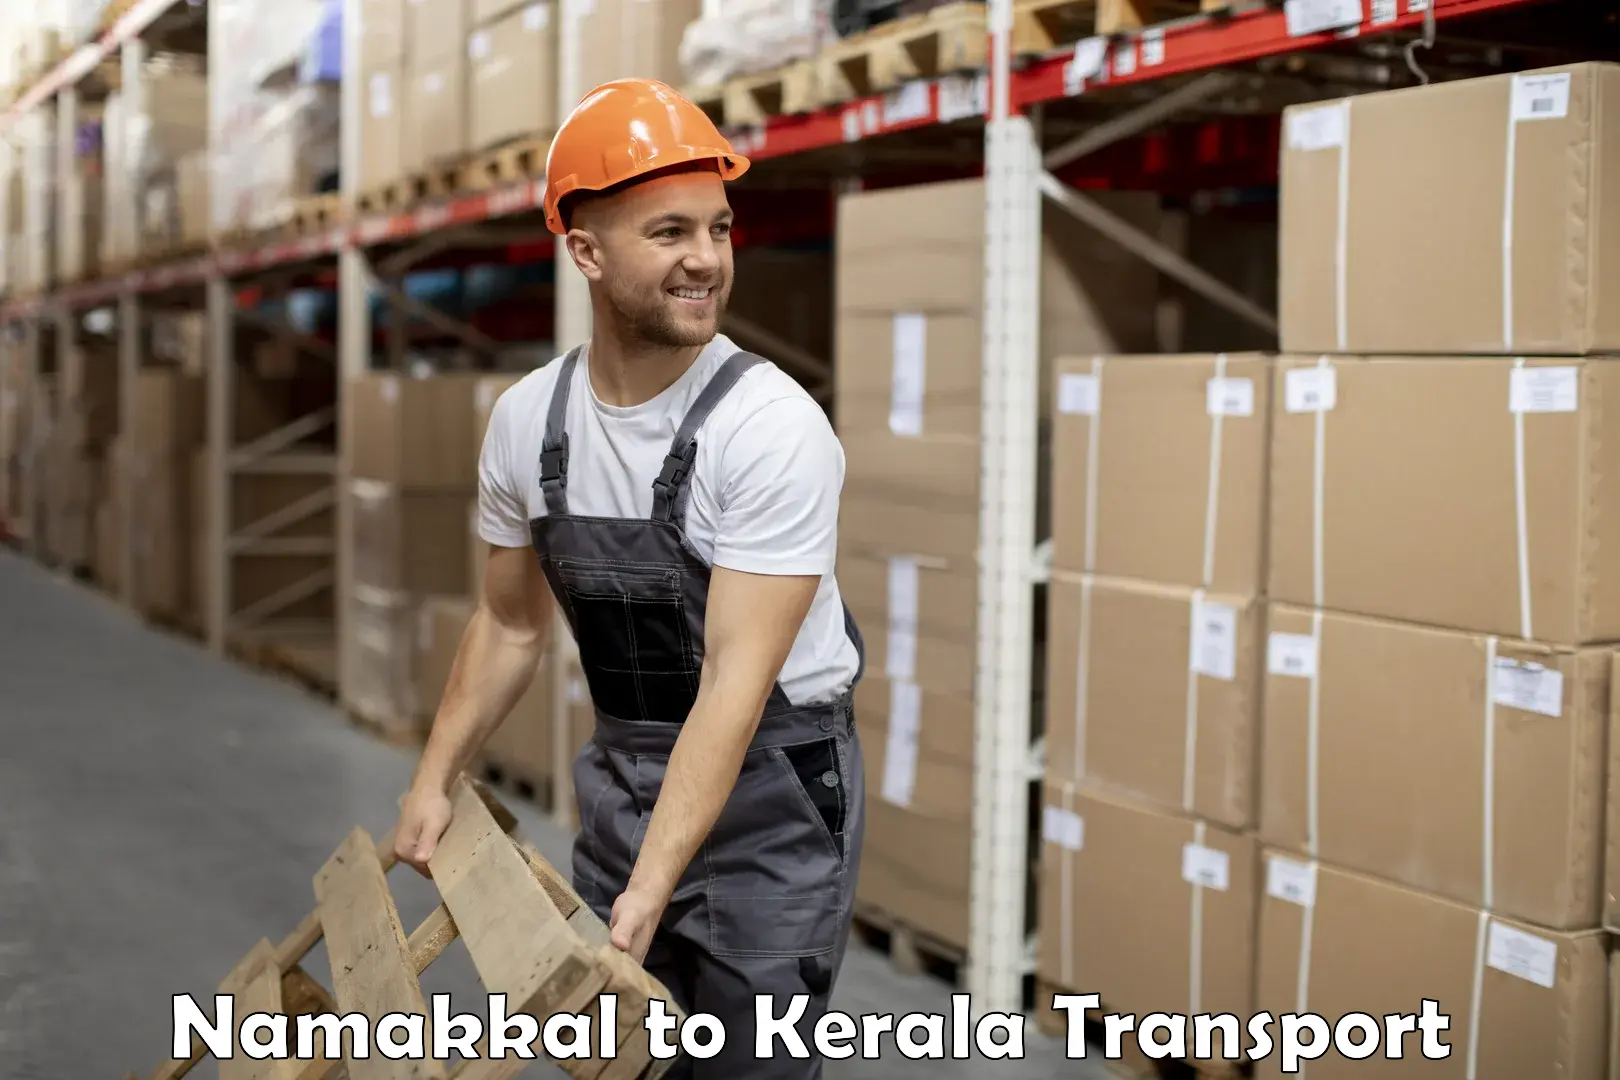 Part load transport service in India Namakkal to Cochin